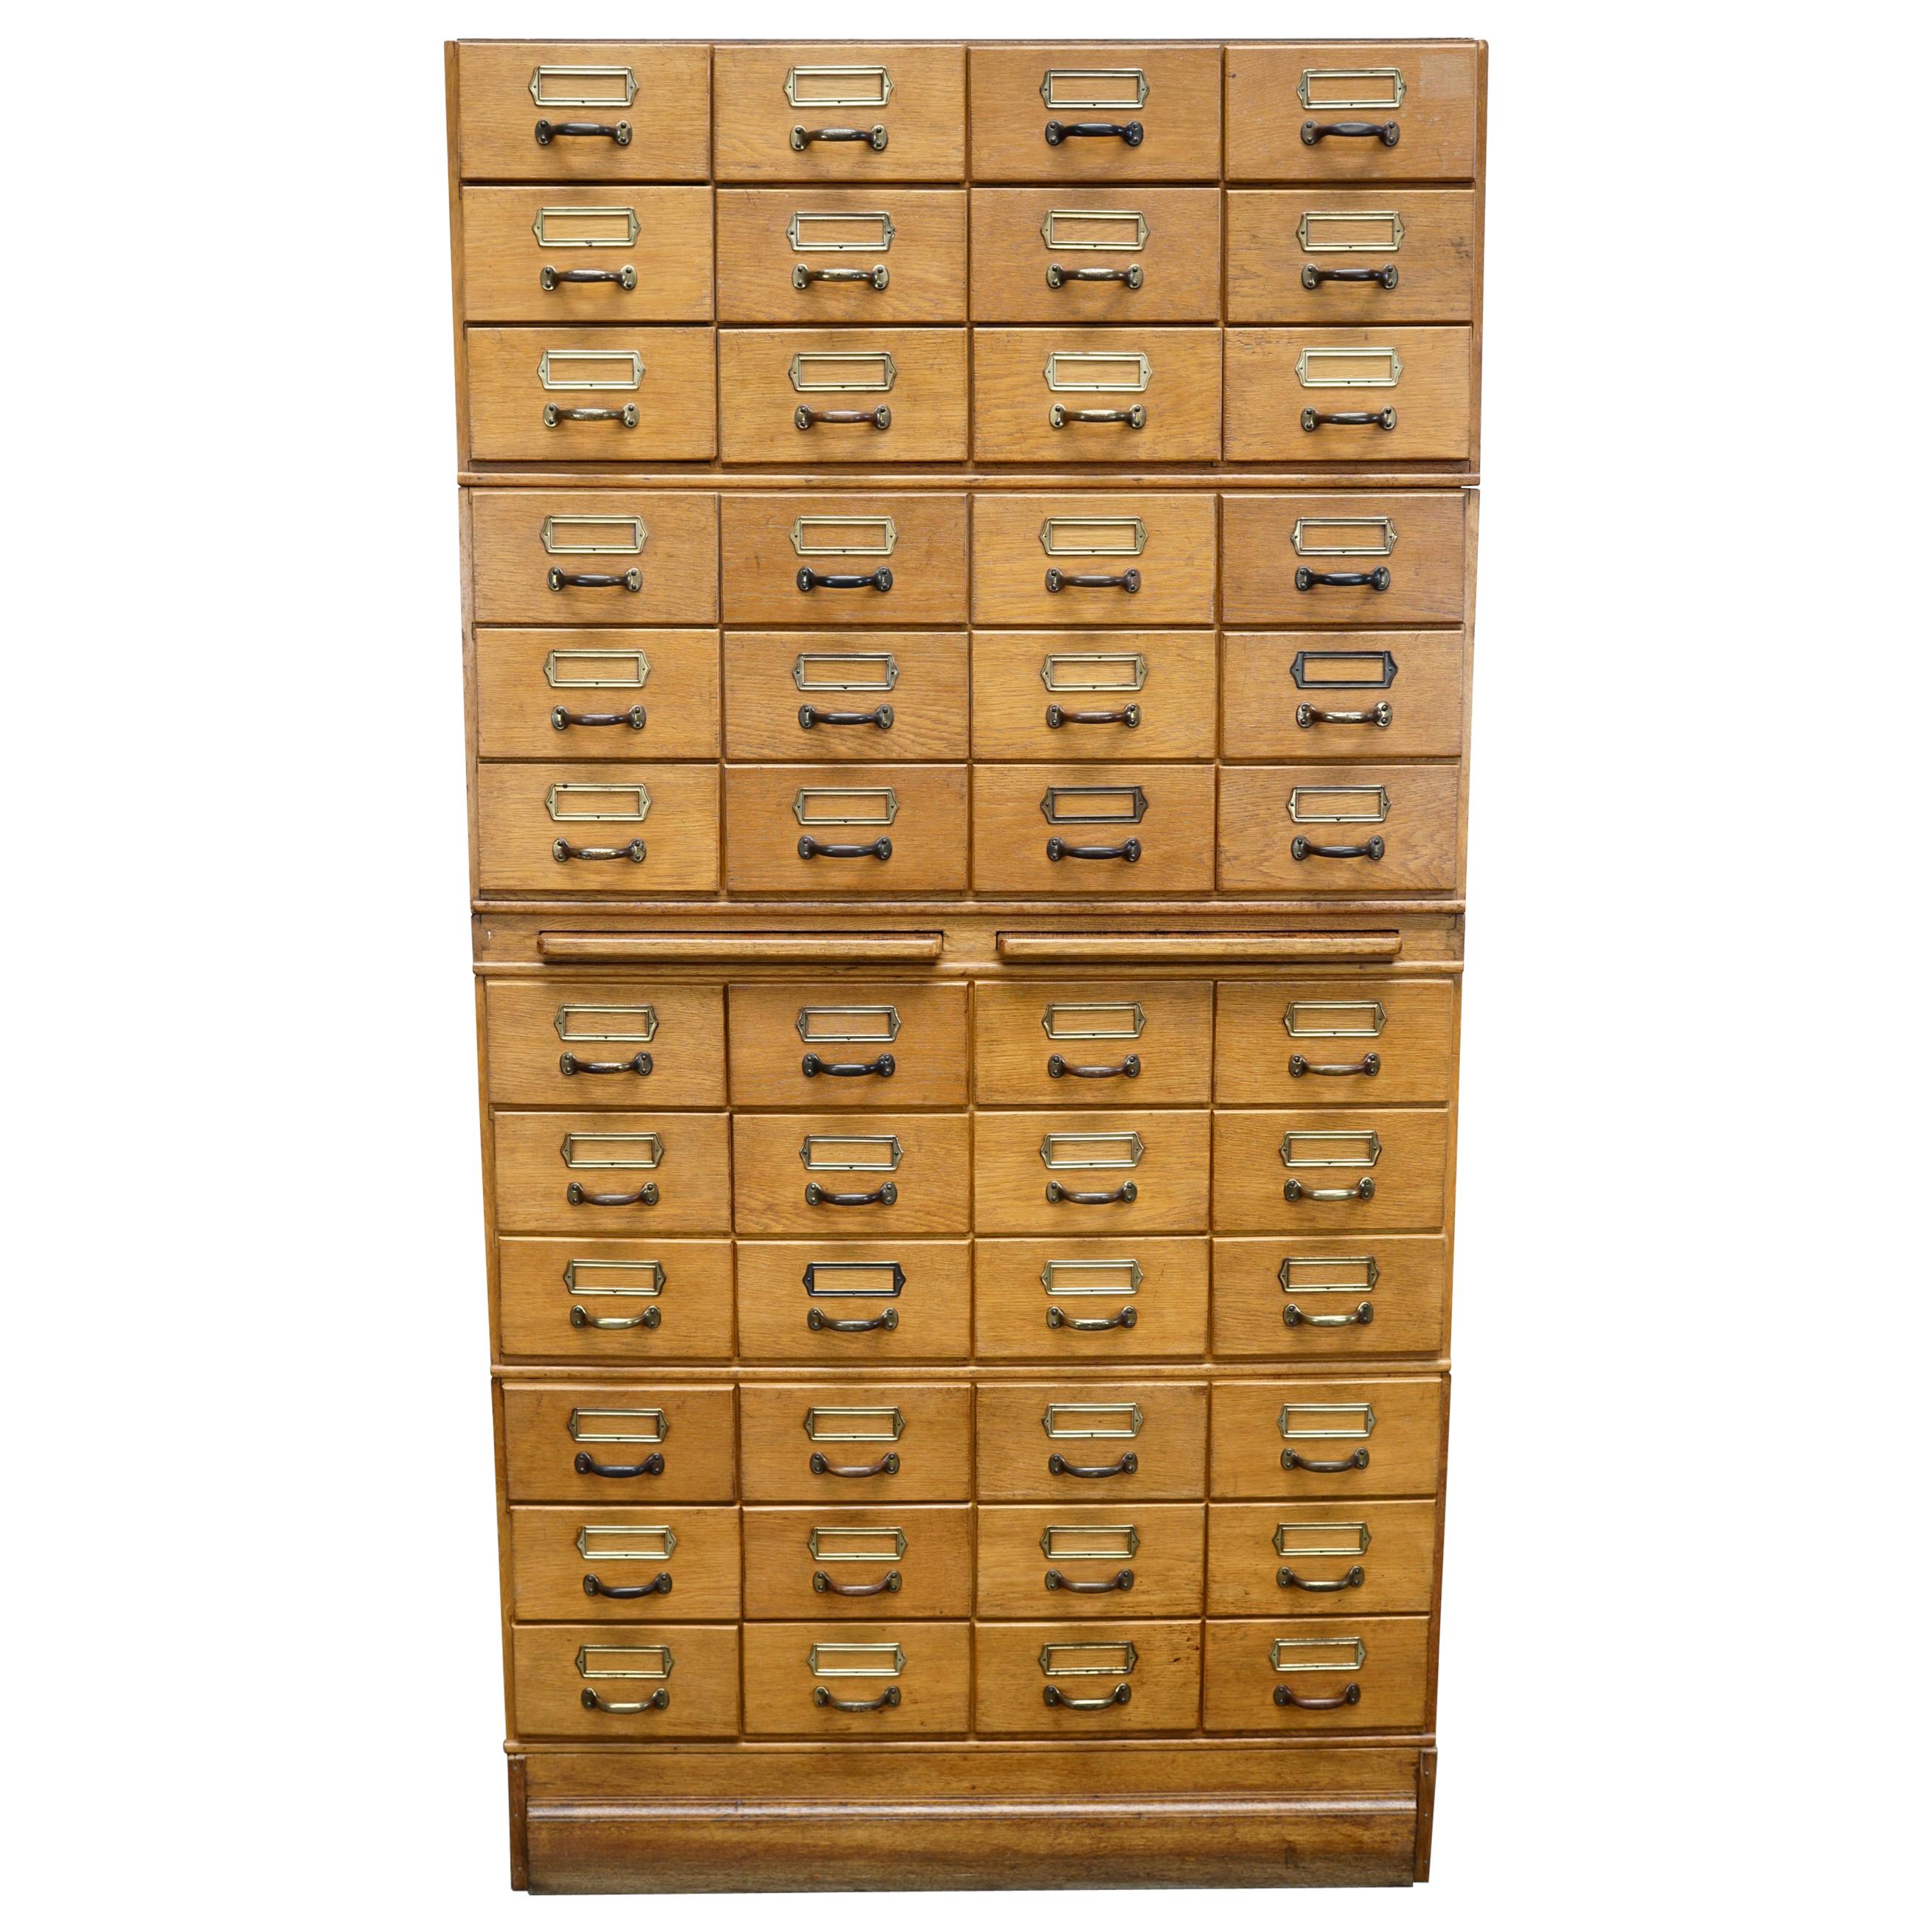 German Oak Apothecary Cabinet / Filing Cabinet, circa 1950s